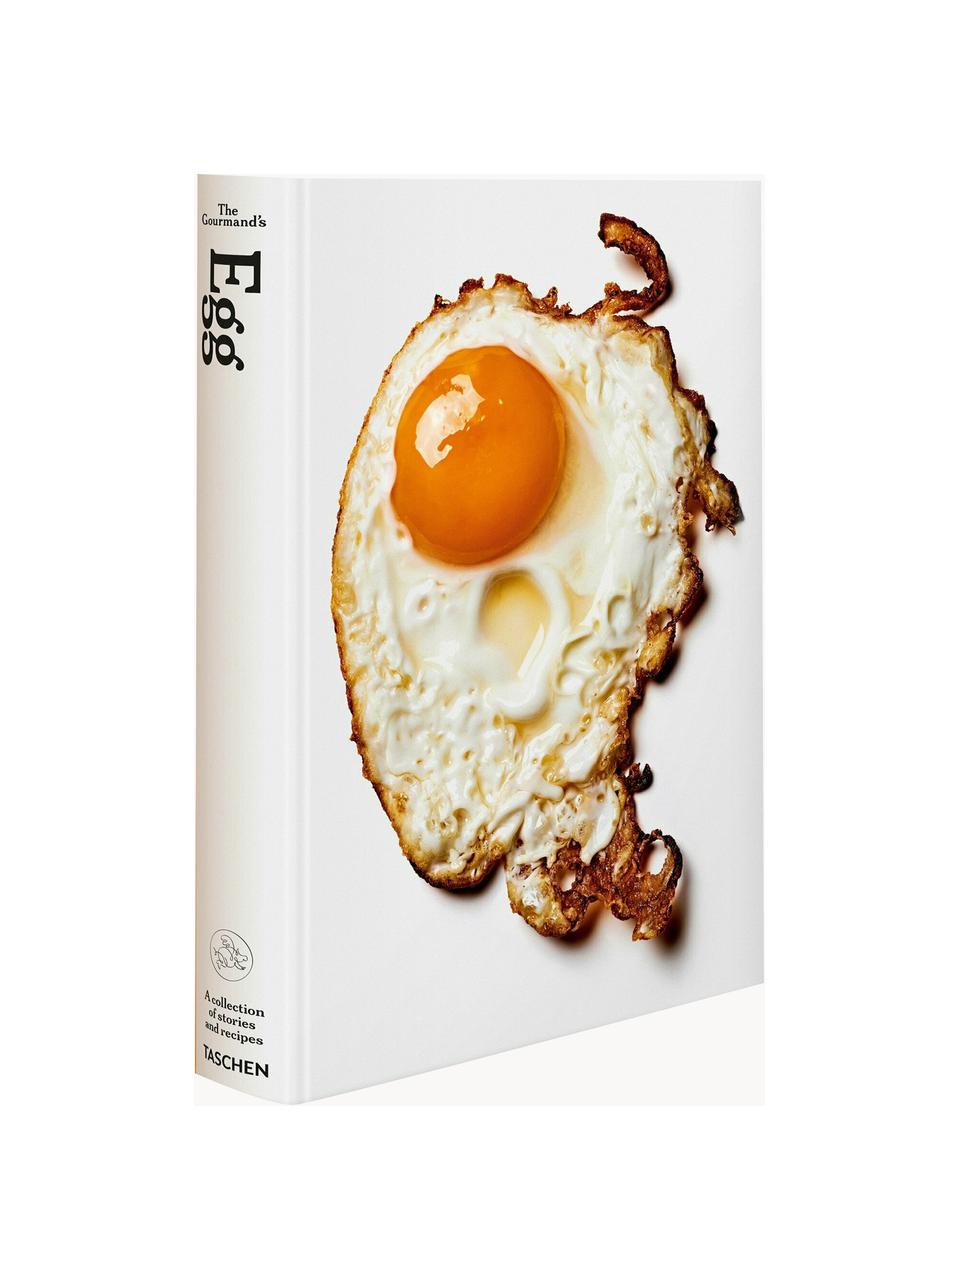 Album Egg. A Collection of Stories & Recipes, Papier, twarda okładka, Egg. A Collection of Stories & Recipes, S 20 x W 28 cm